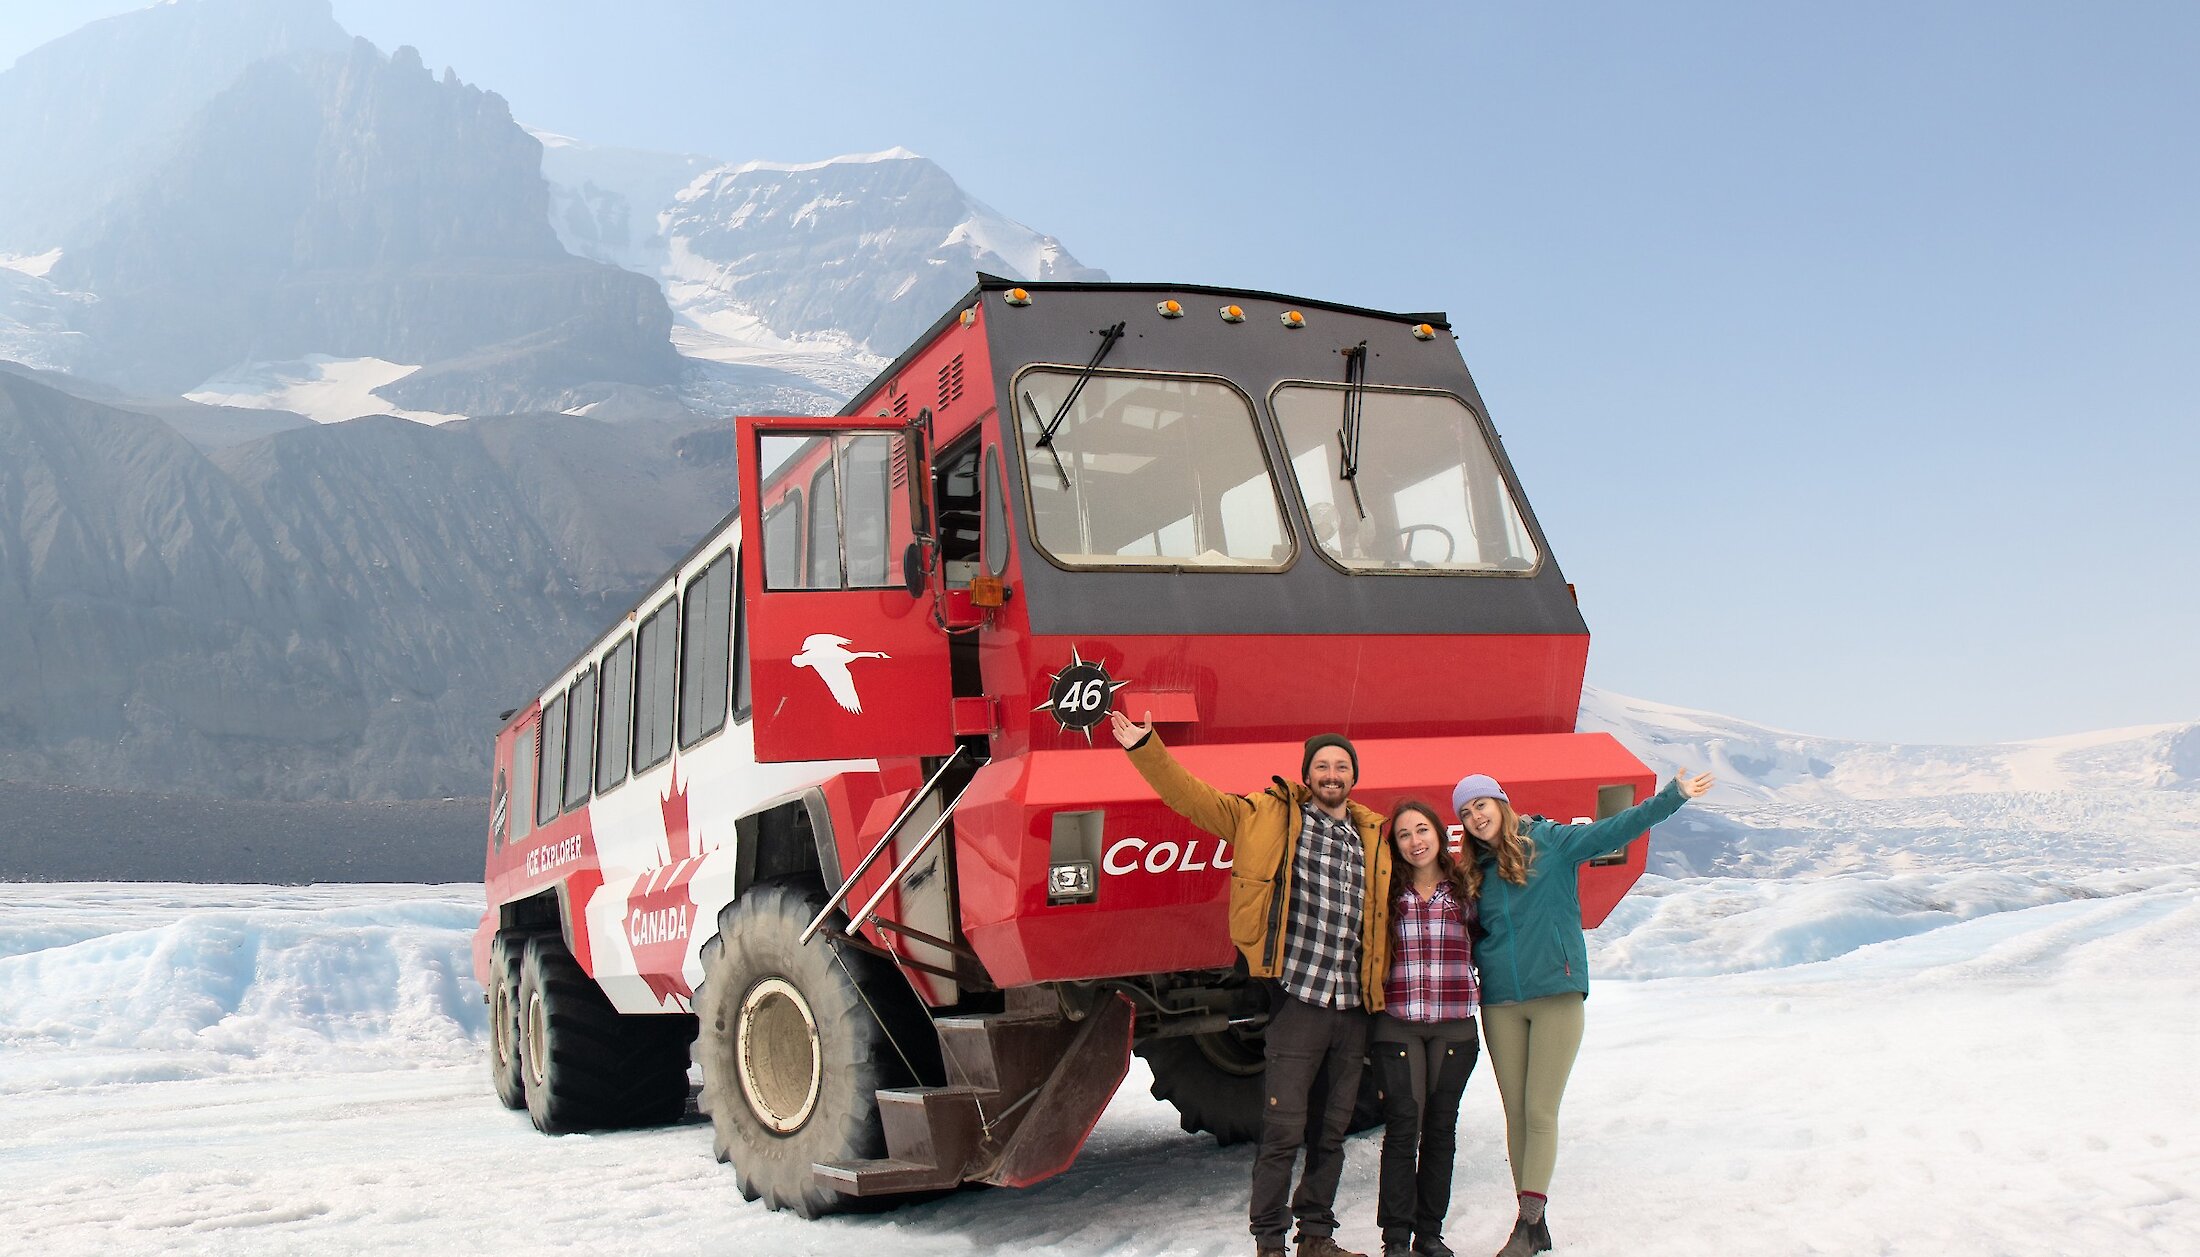 Posing in front of an ice explorer at the Columbia Icefield